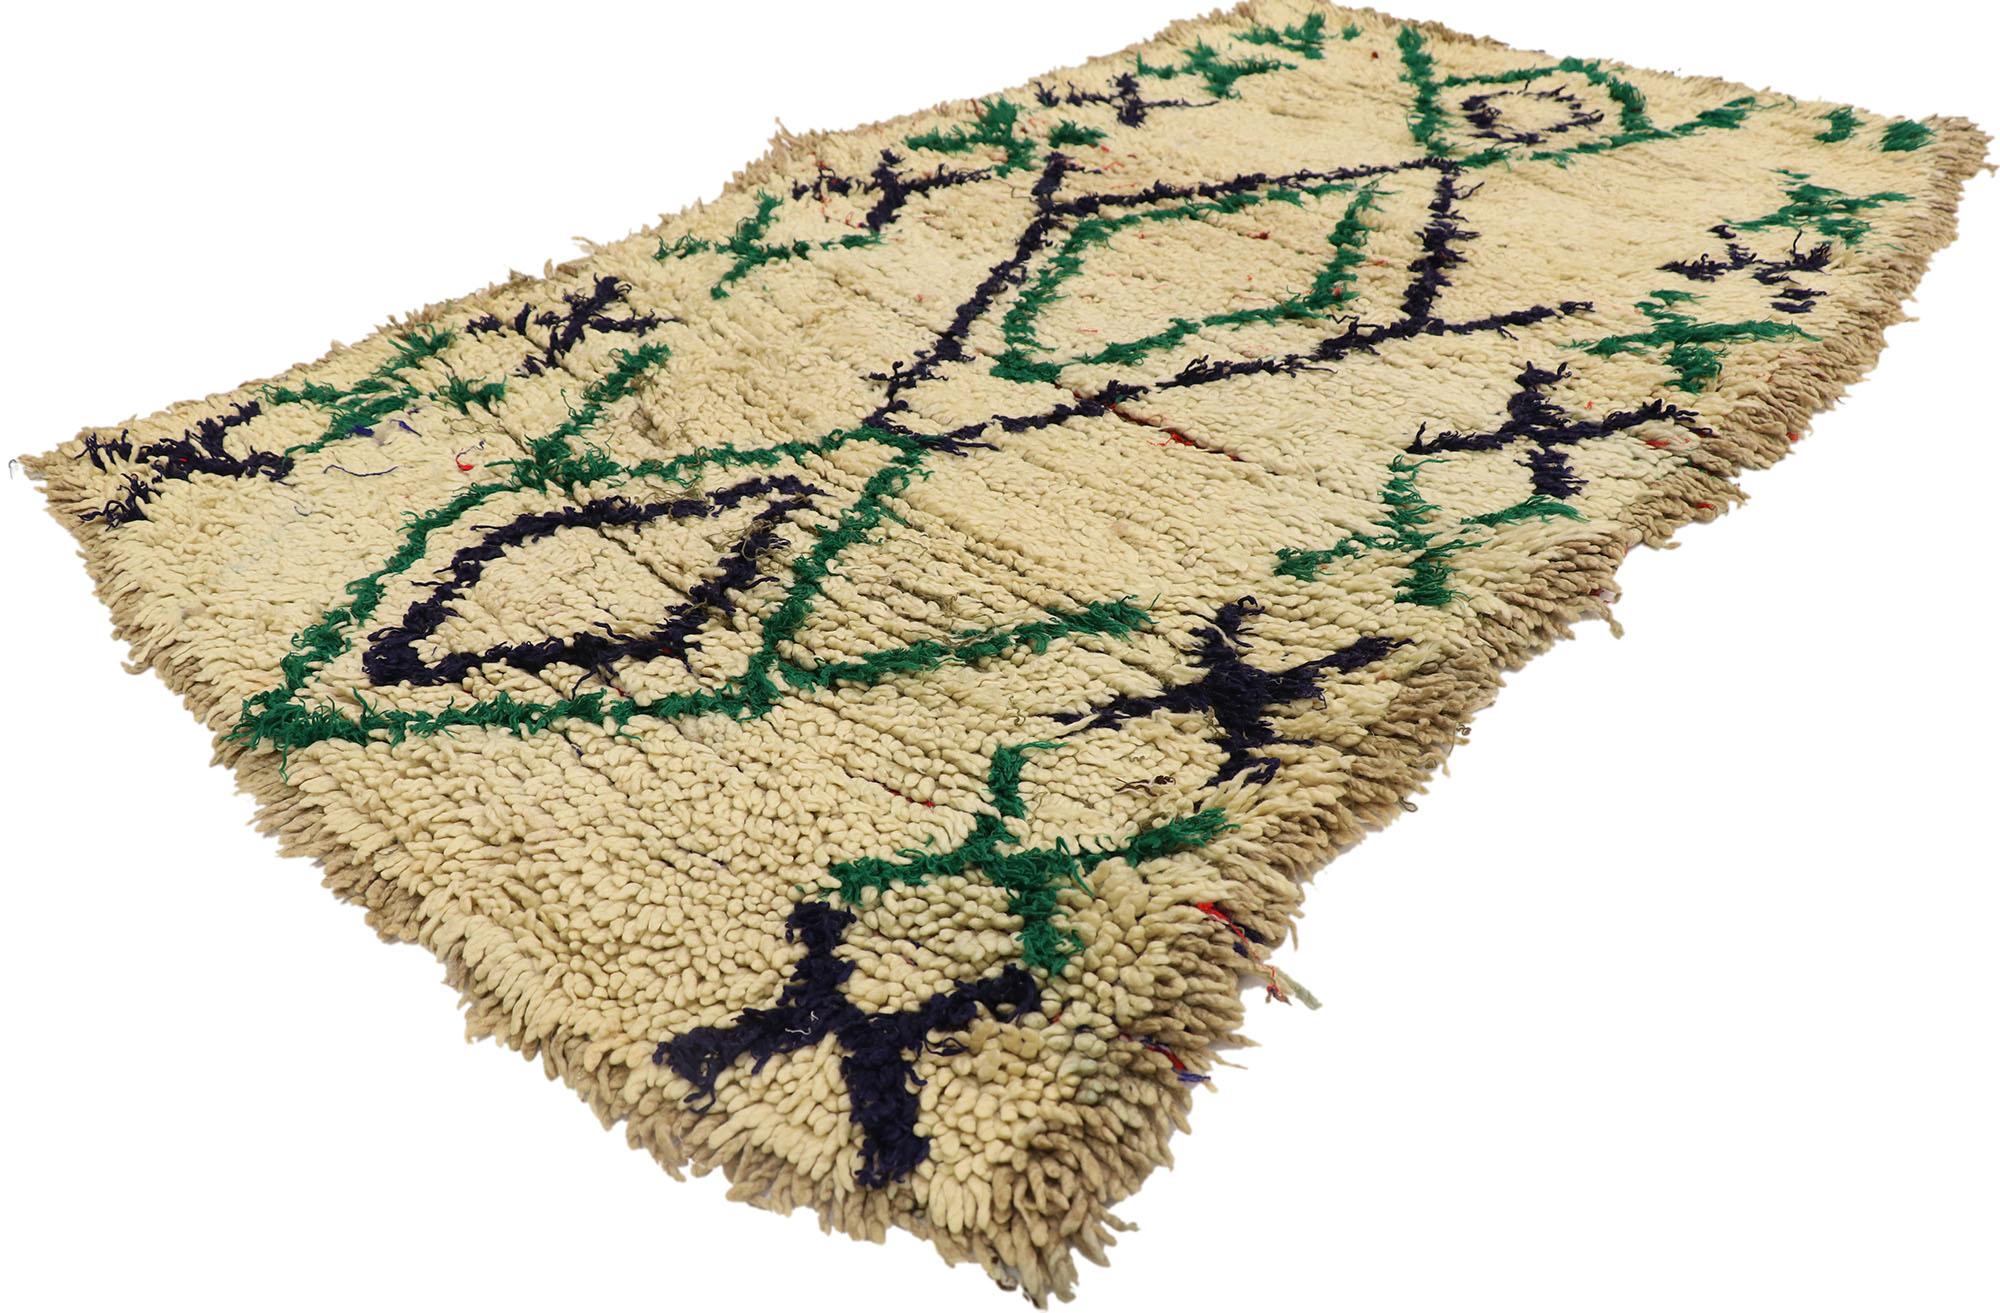 21590 Vintage Berber Moroccan Boucherouite rug with Tribal Style 03'00 x 05'00. Warm and inviting, this hand-knotted wool and cotton vintage Berber Boucherouite Moroccan rug is a captivating vision of woven beauty. The abrashed beige field features